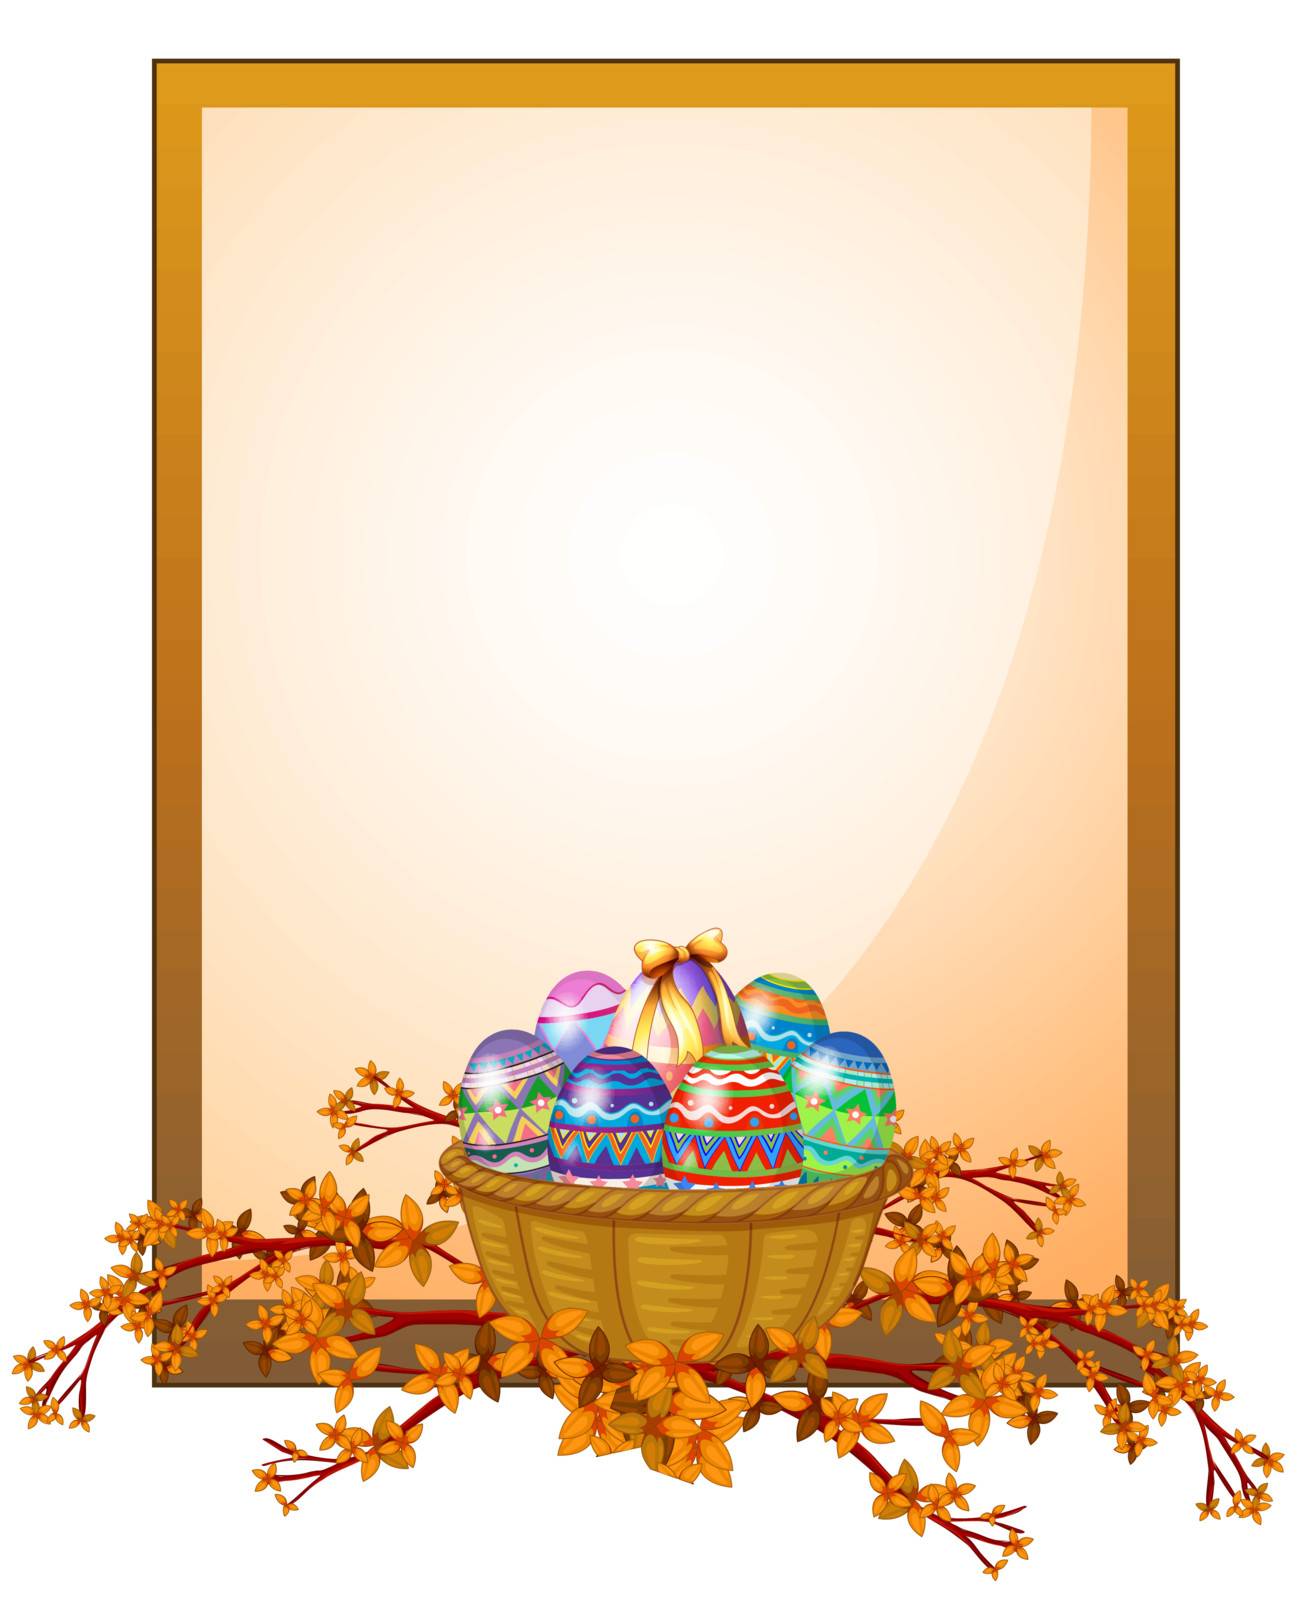 Illustration of an empty frame signage with a basket of eggs on a white background